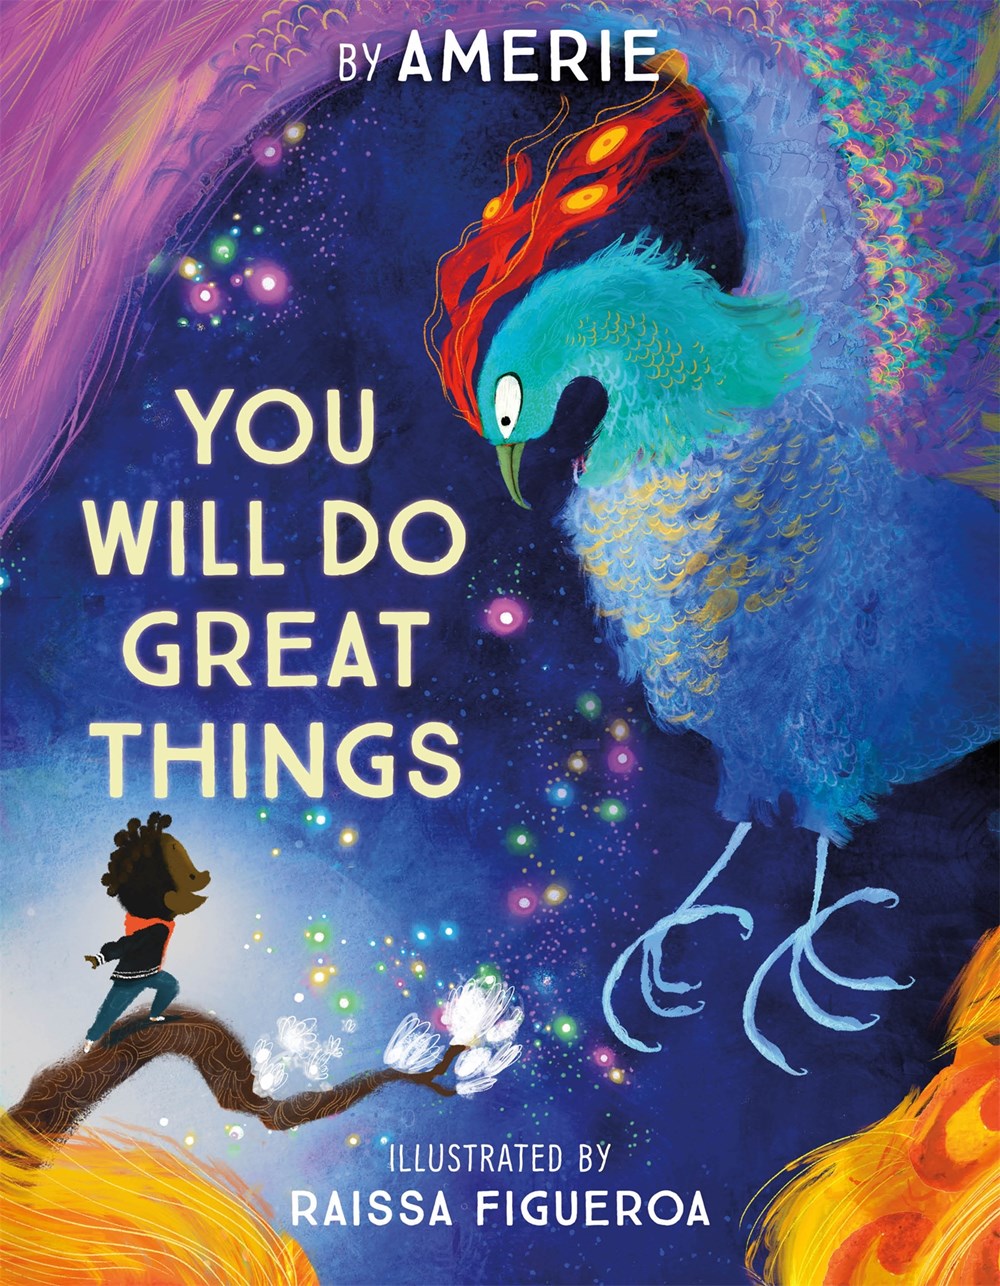 You Will Do Great Things